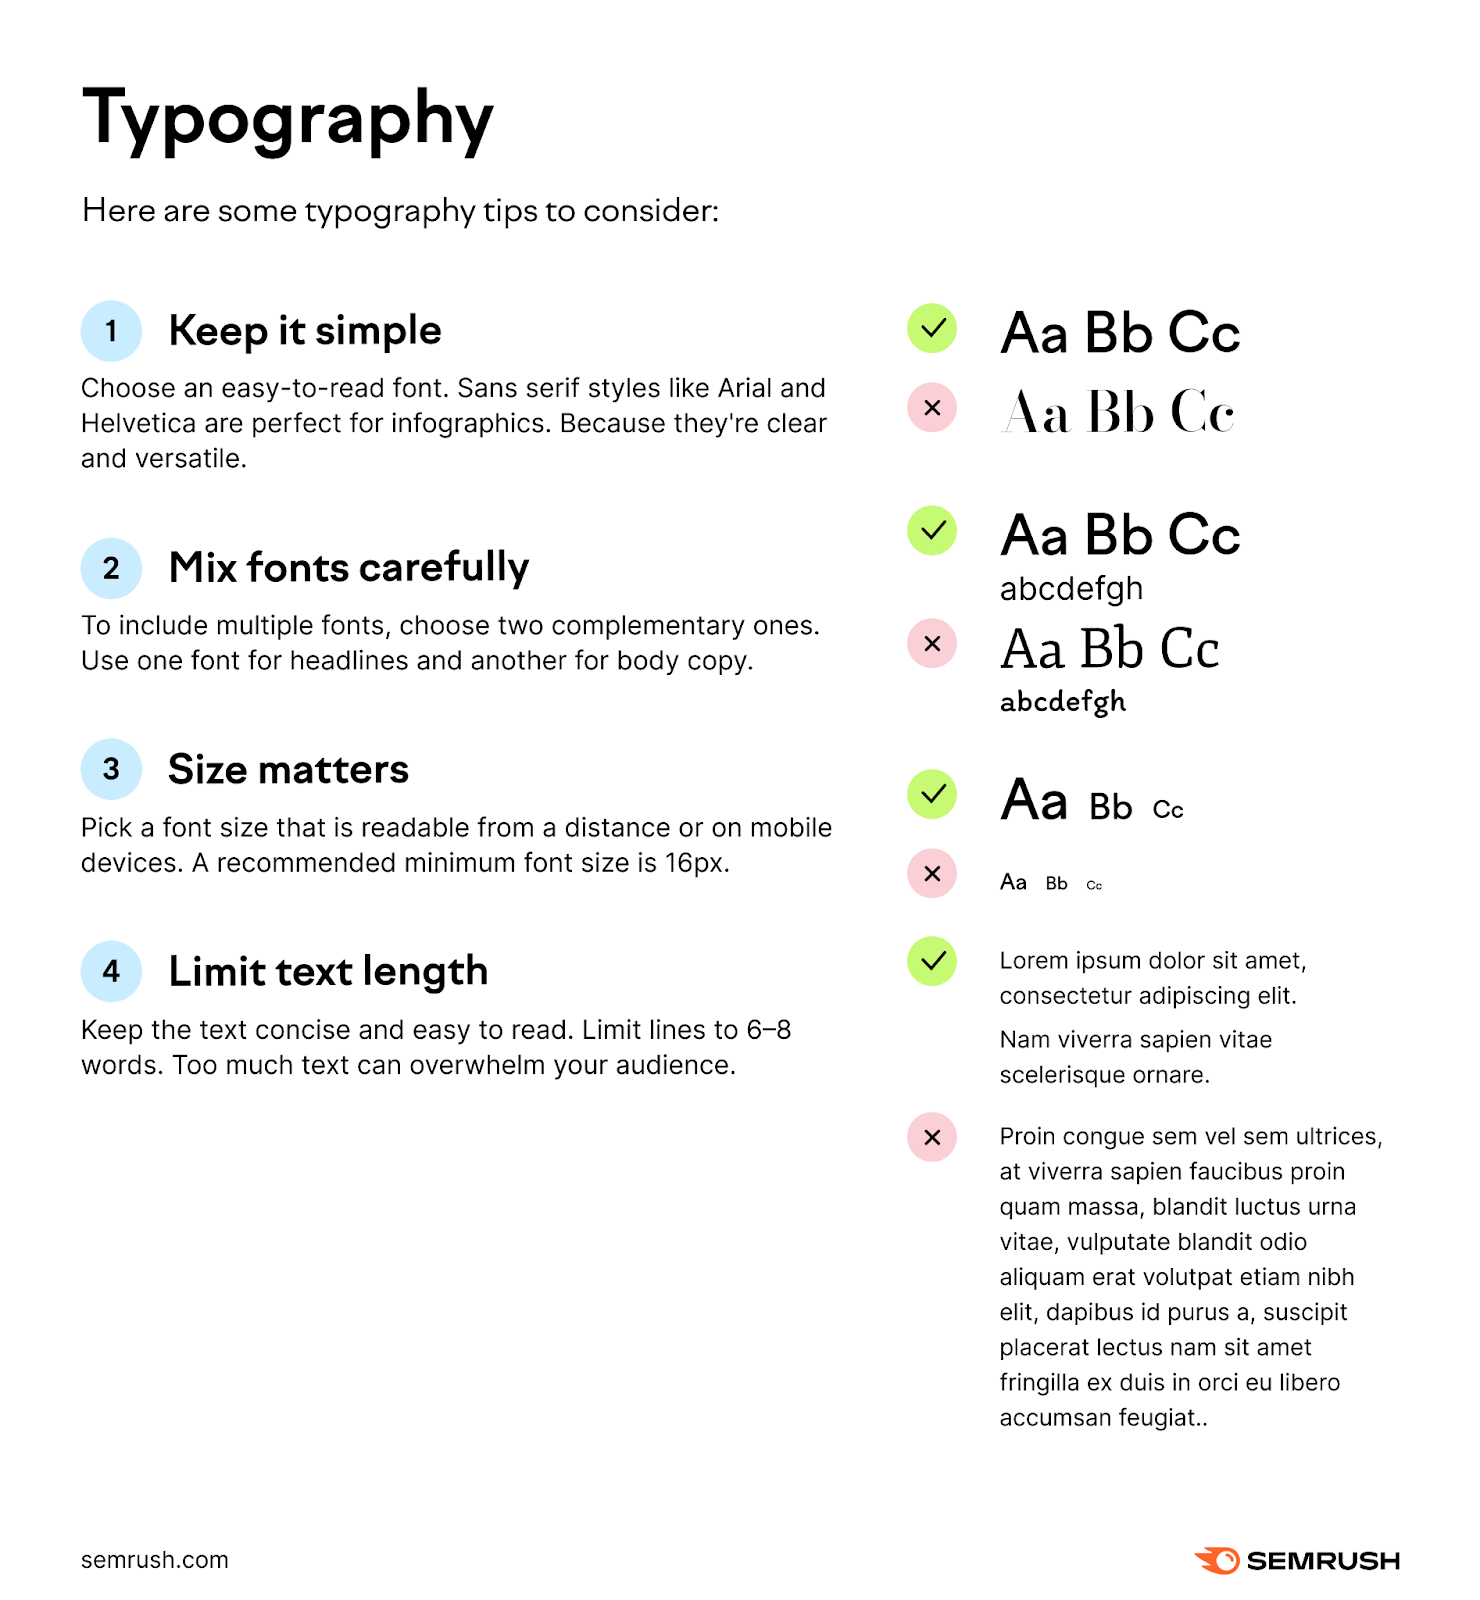 Semrush's infographic on typography, listing the four typography tips for infographics